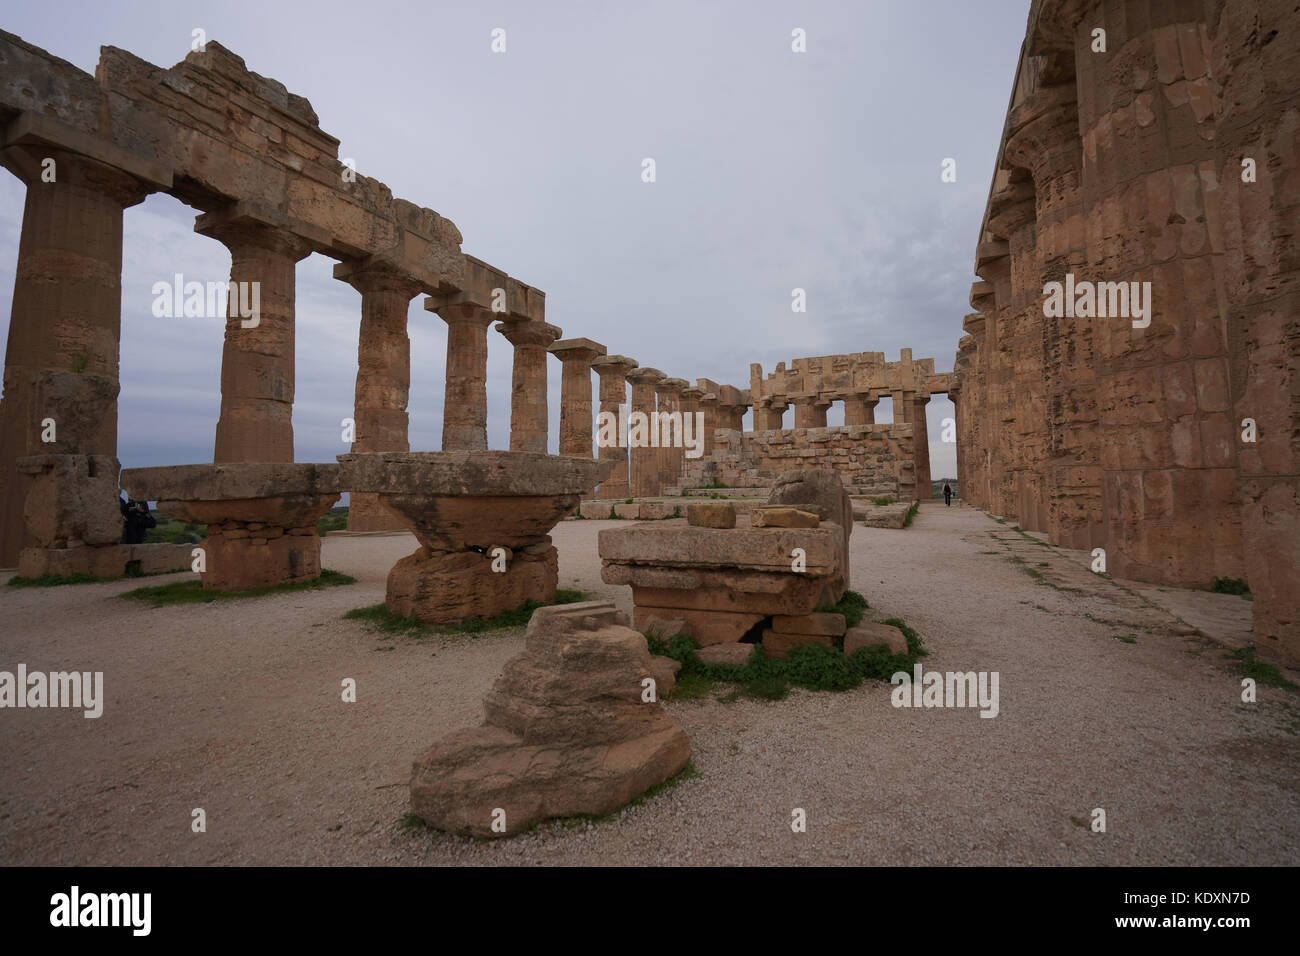 The Temple of Hera (also known as Temple E) at the Greek archeological site of Selinunte. From a series of travel photos in Sicily, Italy. Photo date: Stock Photo